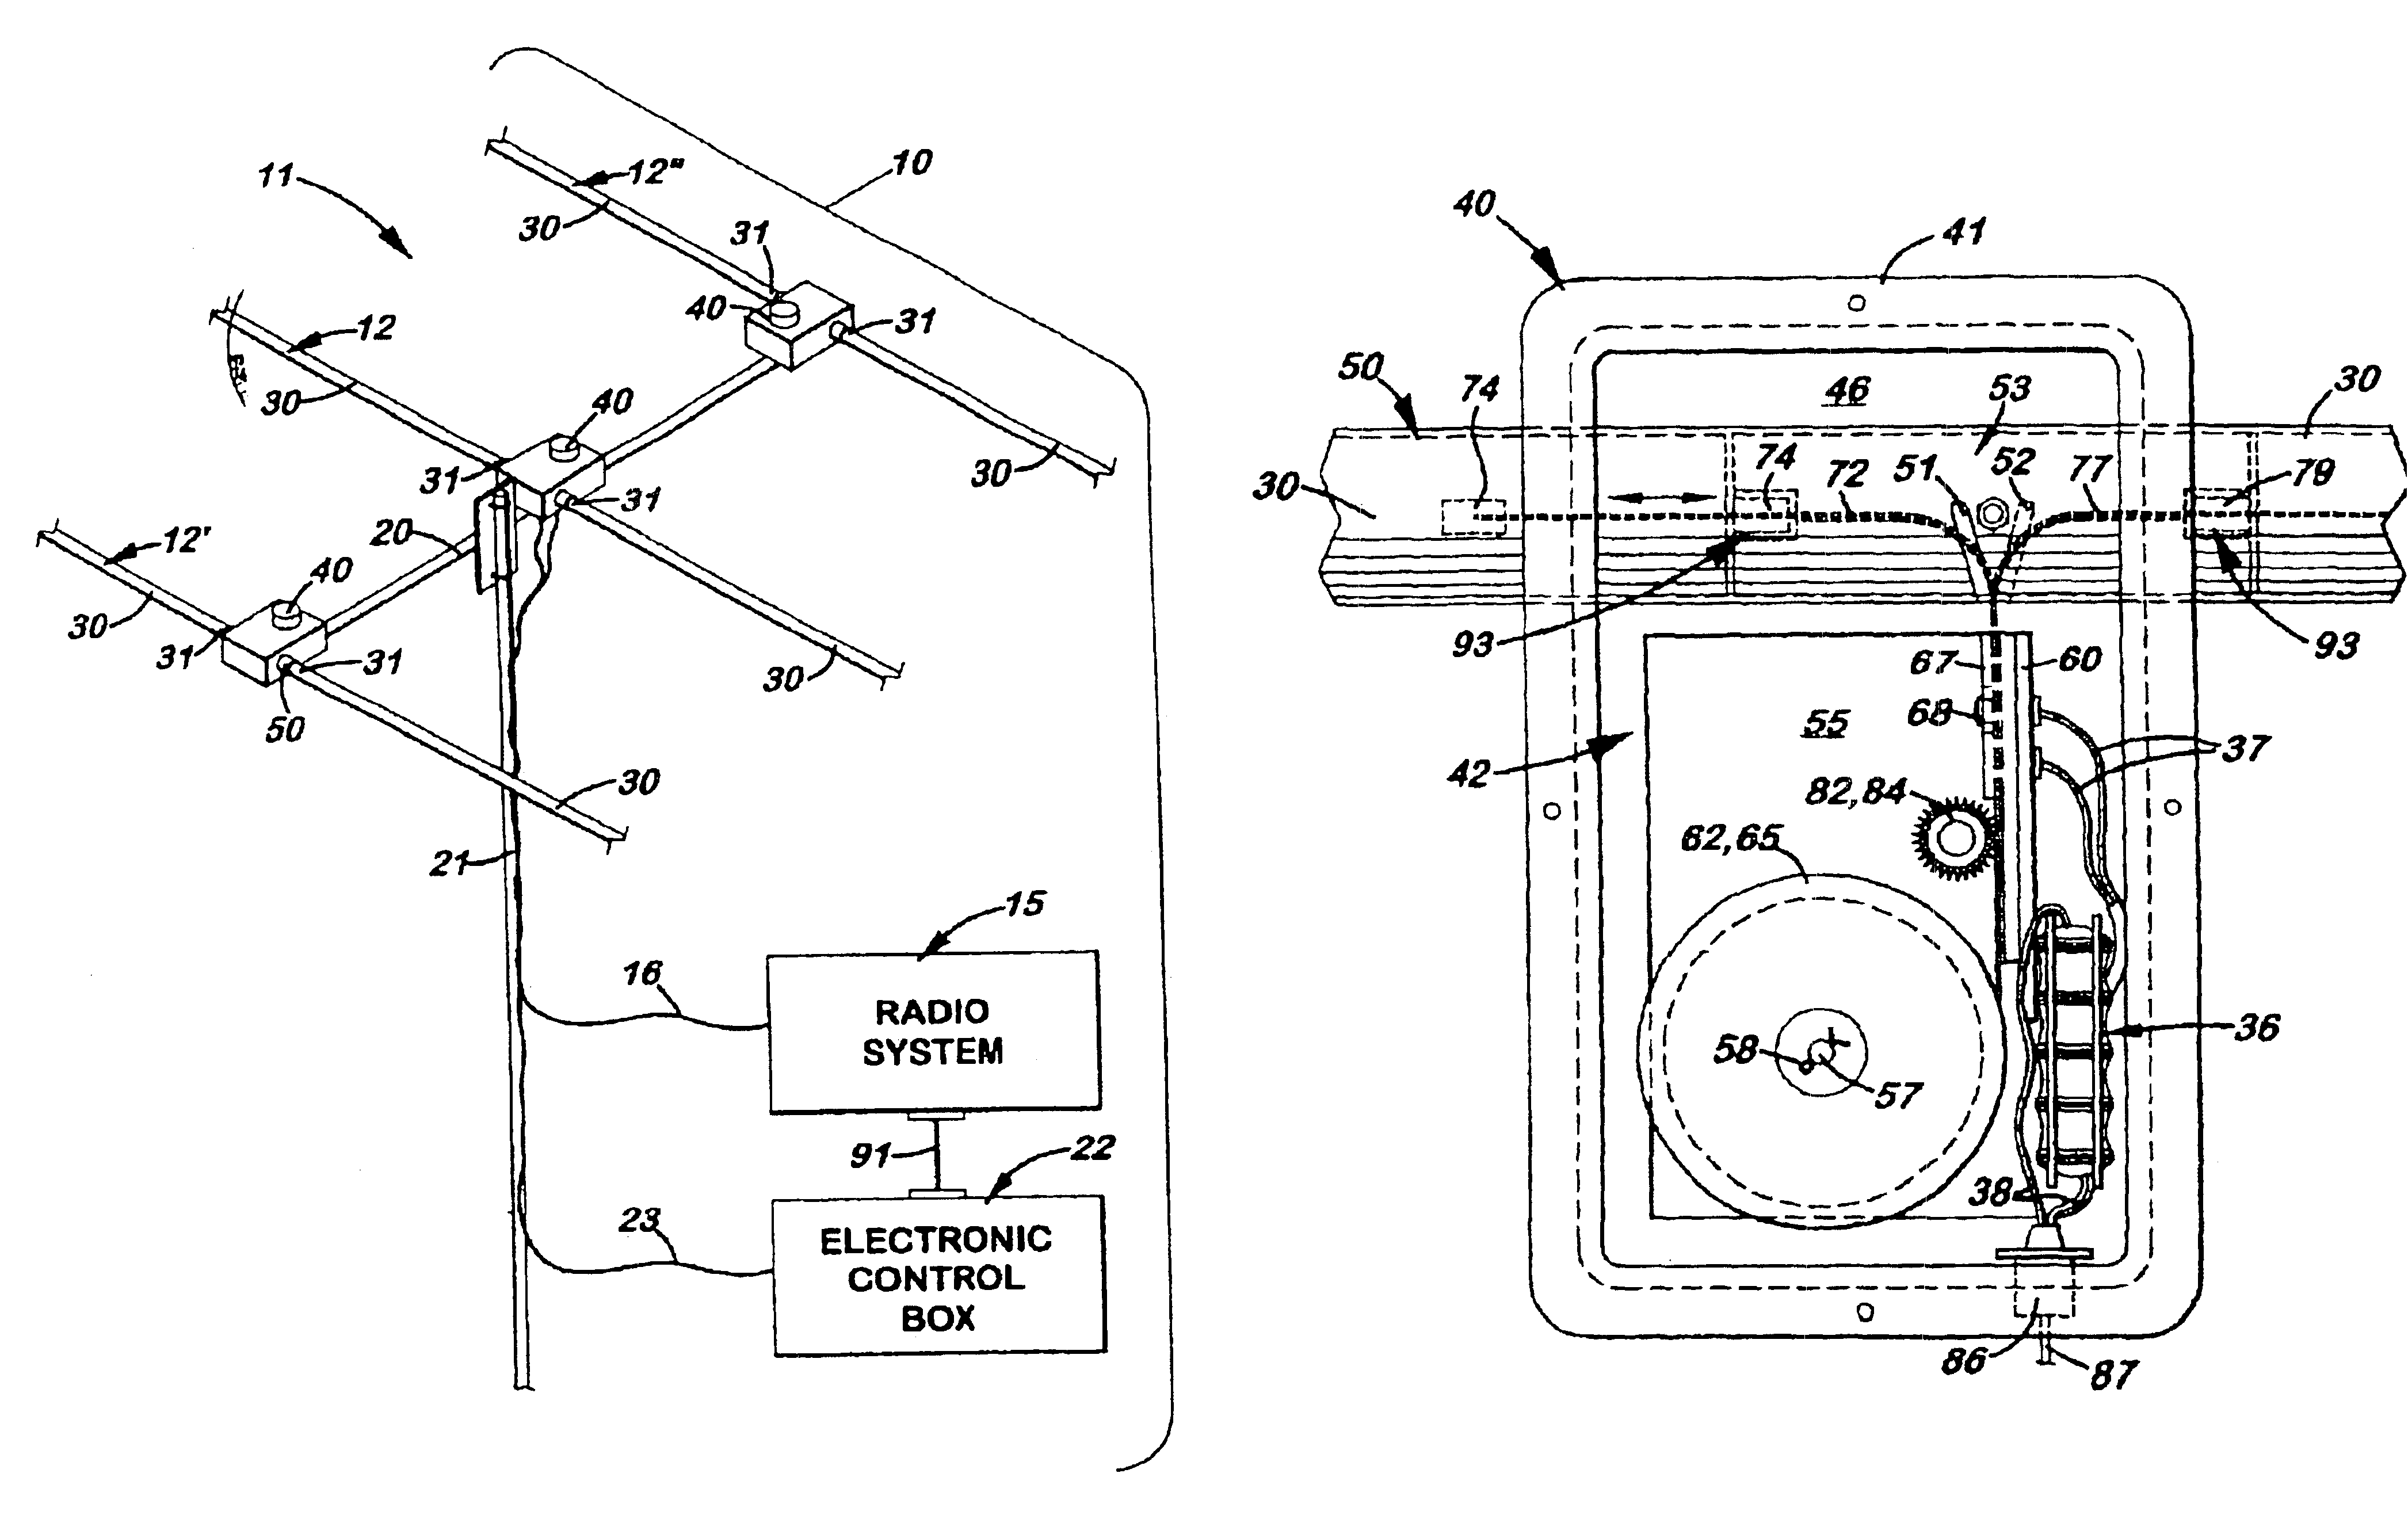 Tunable antenna system